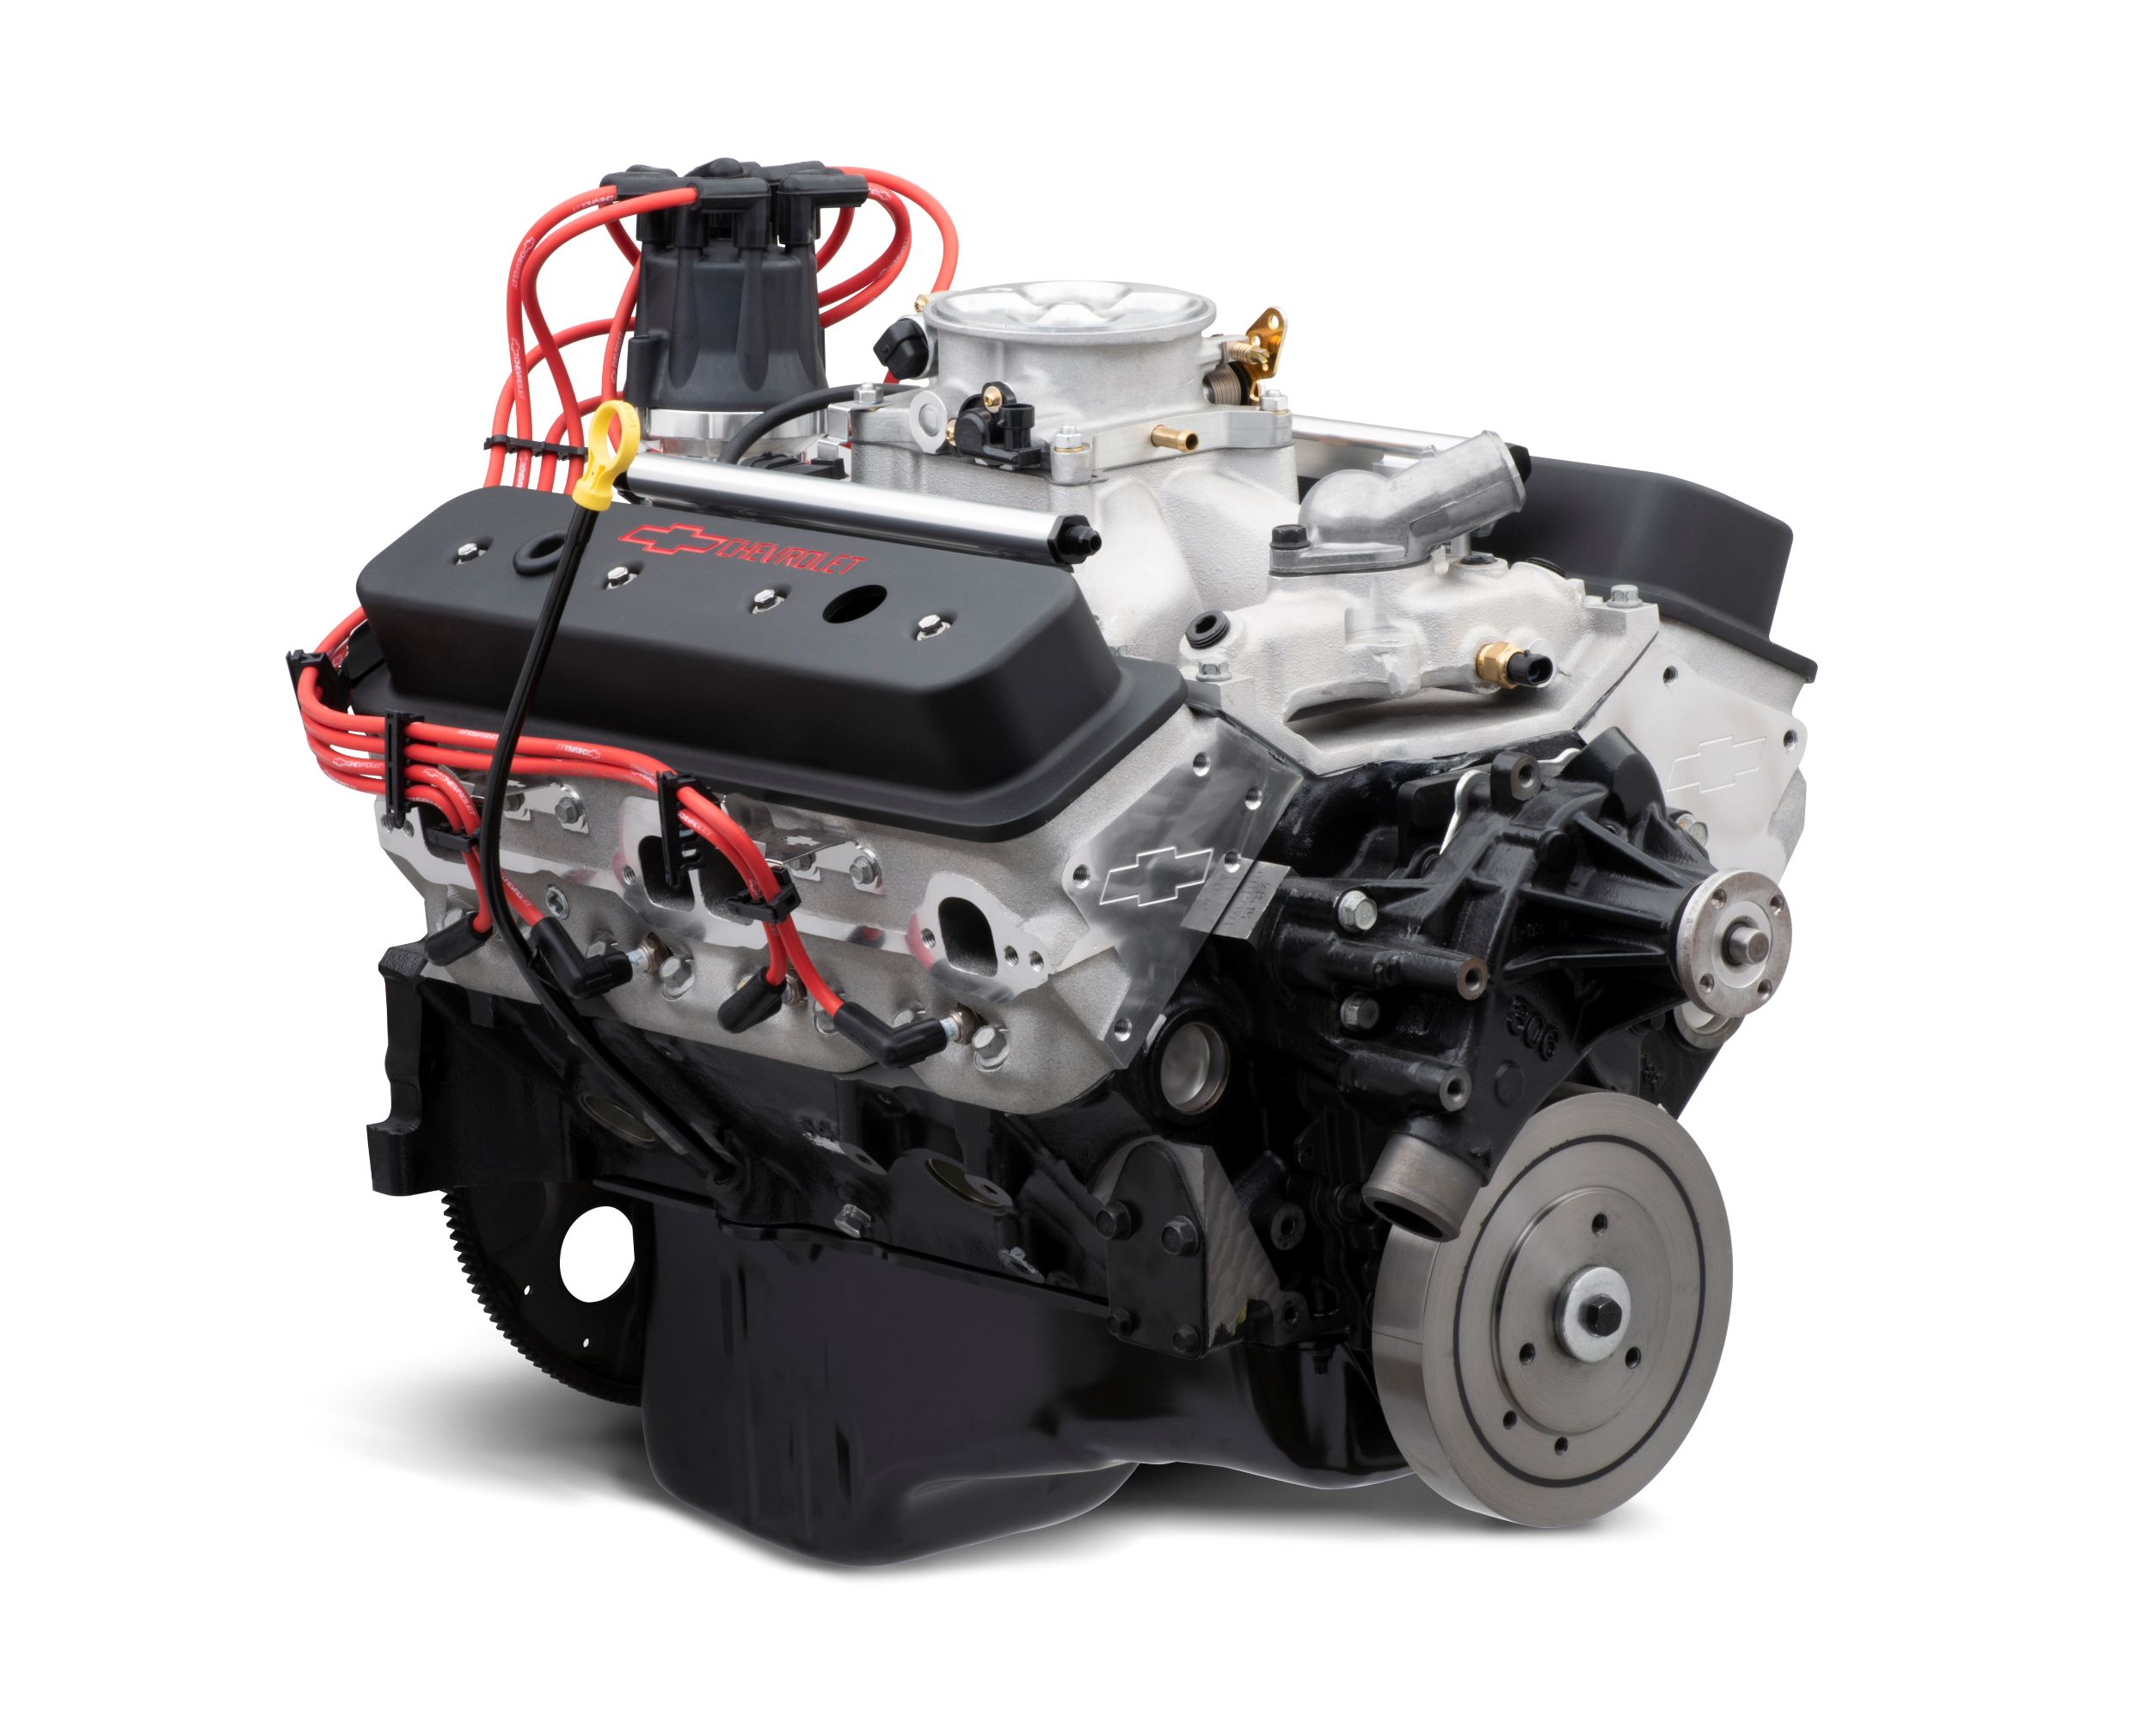 New Chevrolet Sp3 V8 Crate Engine Showcased Gm Authority